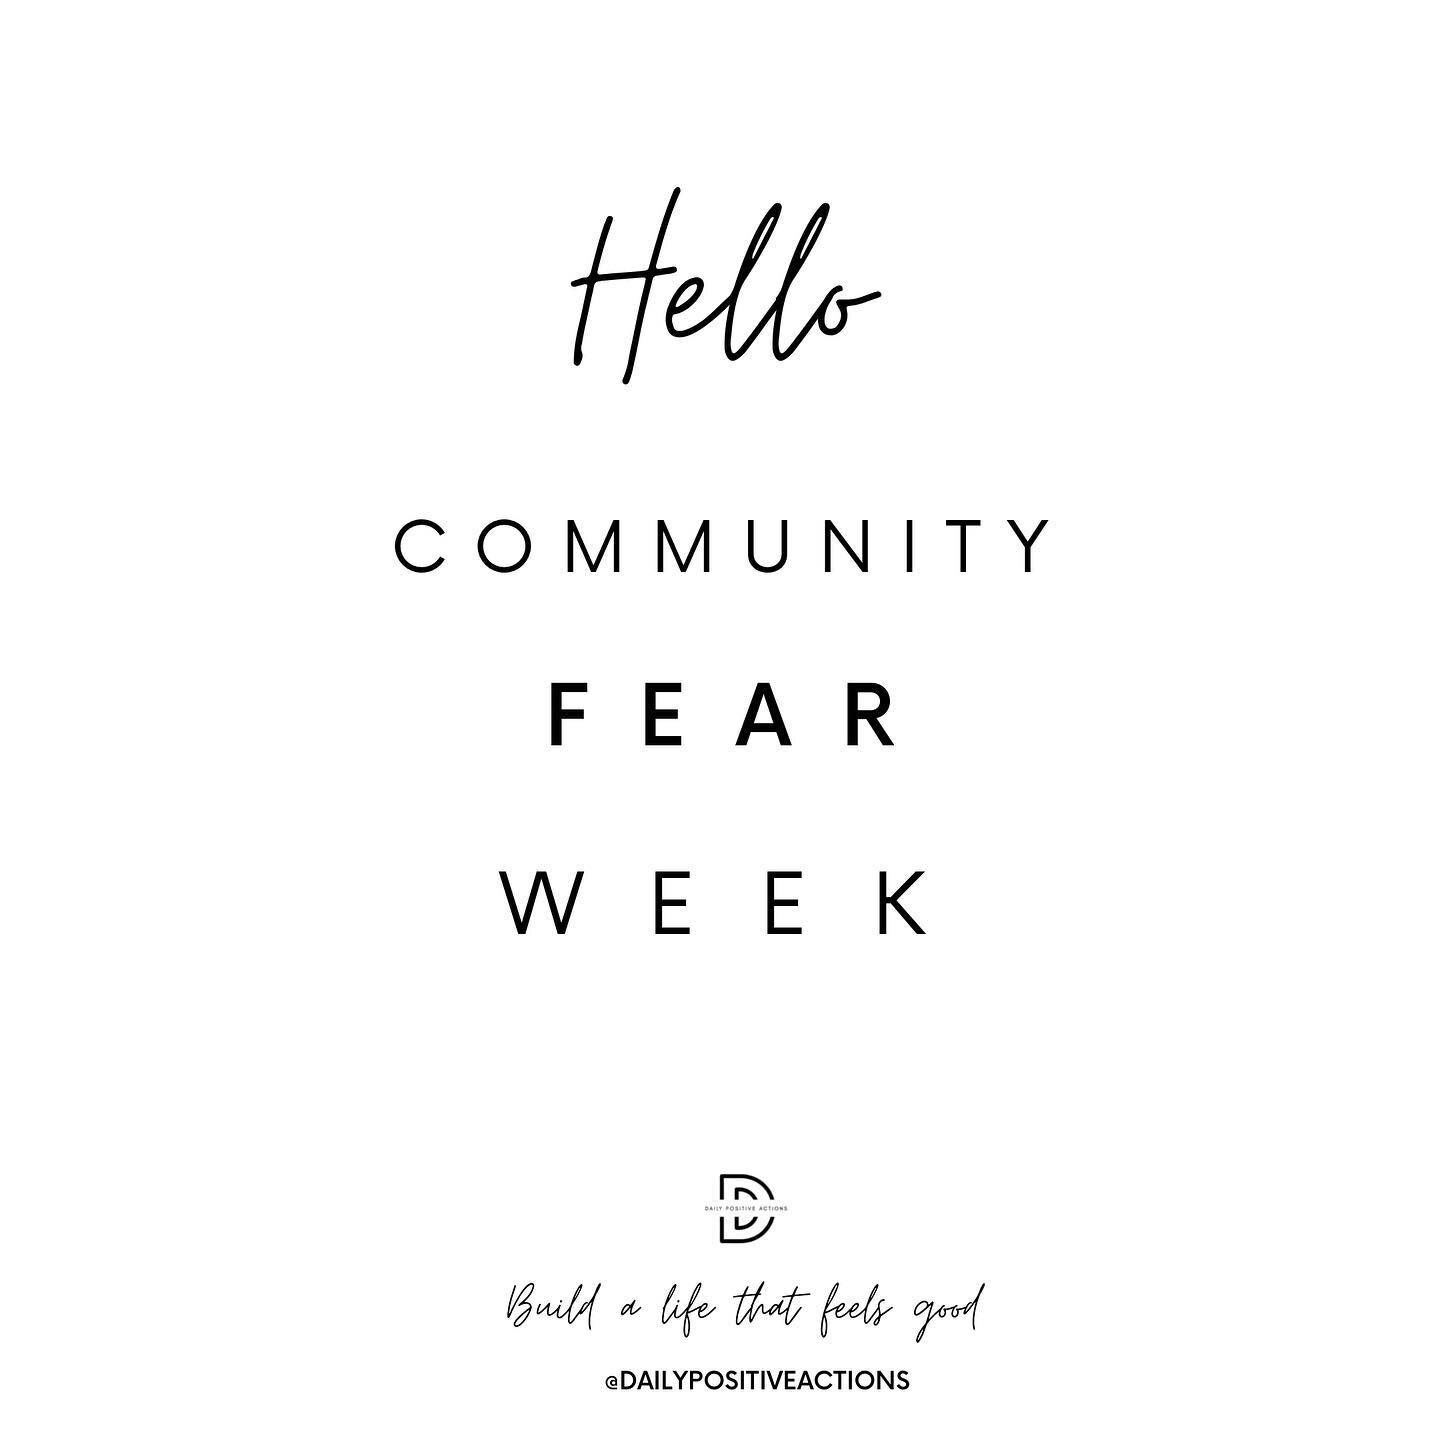 The focus&rsquo;s &amp; reflections this week have been; + FEAR 

We discussed;

+ Does fear &amp; resistance hold you back from accessing your potential?

+ Can we redefine fear &amp; how it operates in our lives?

+ Has your fear increased during t